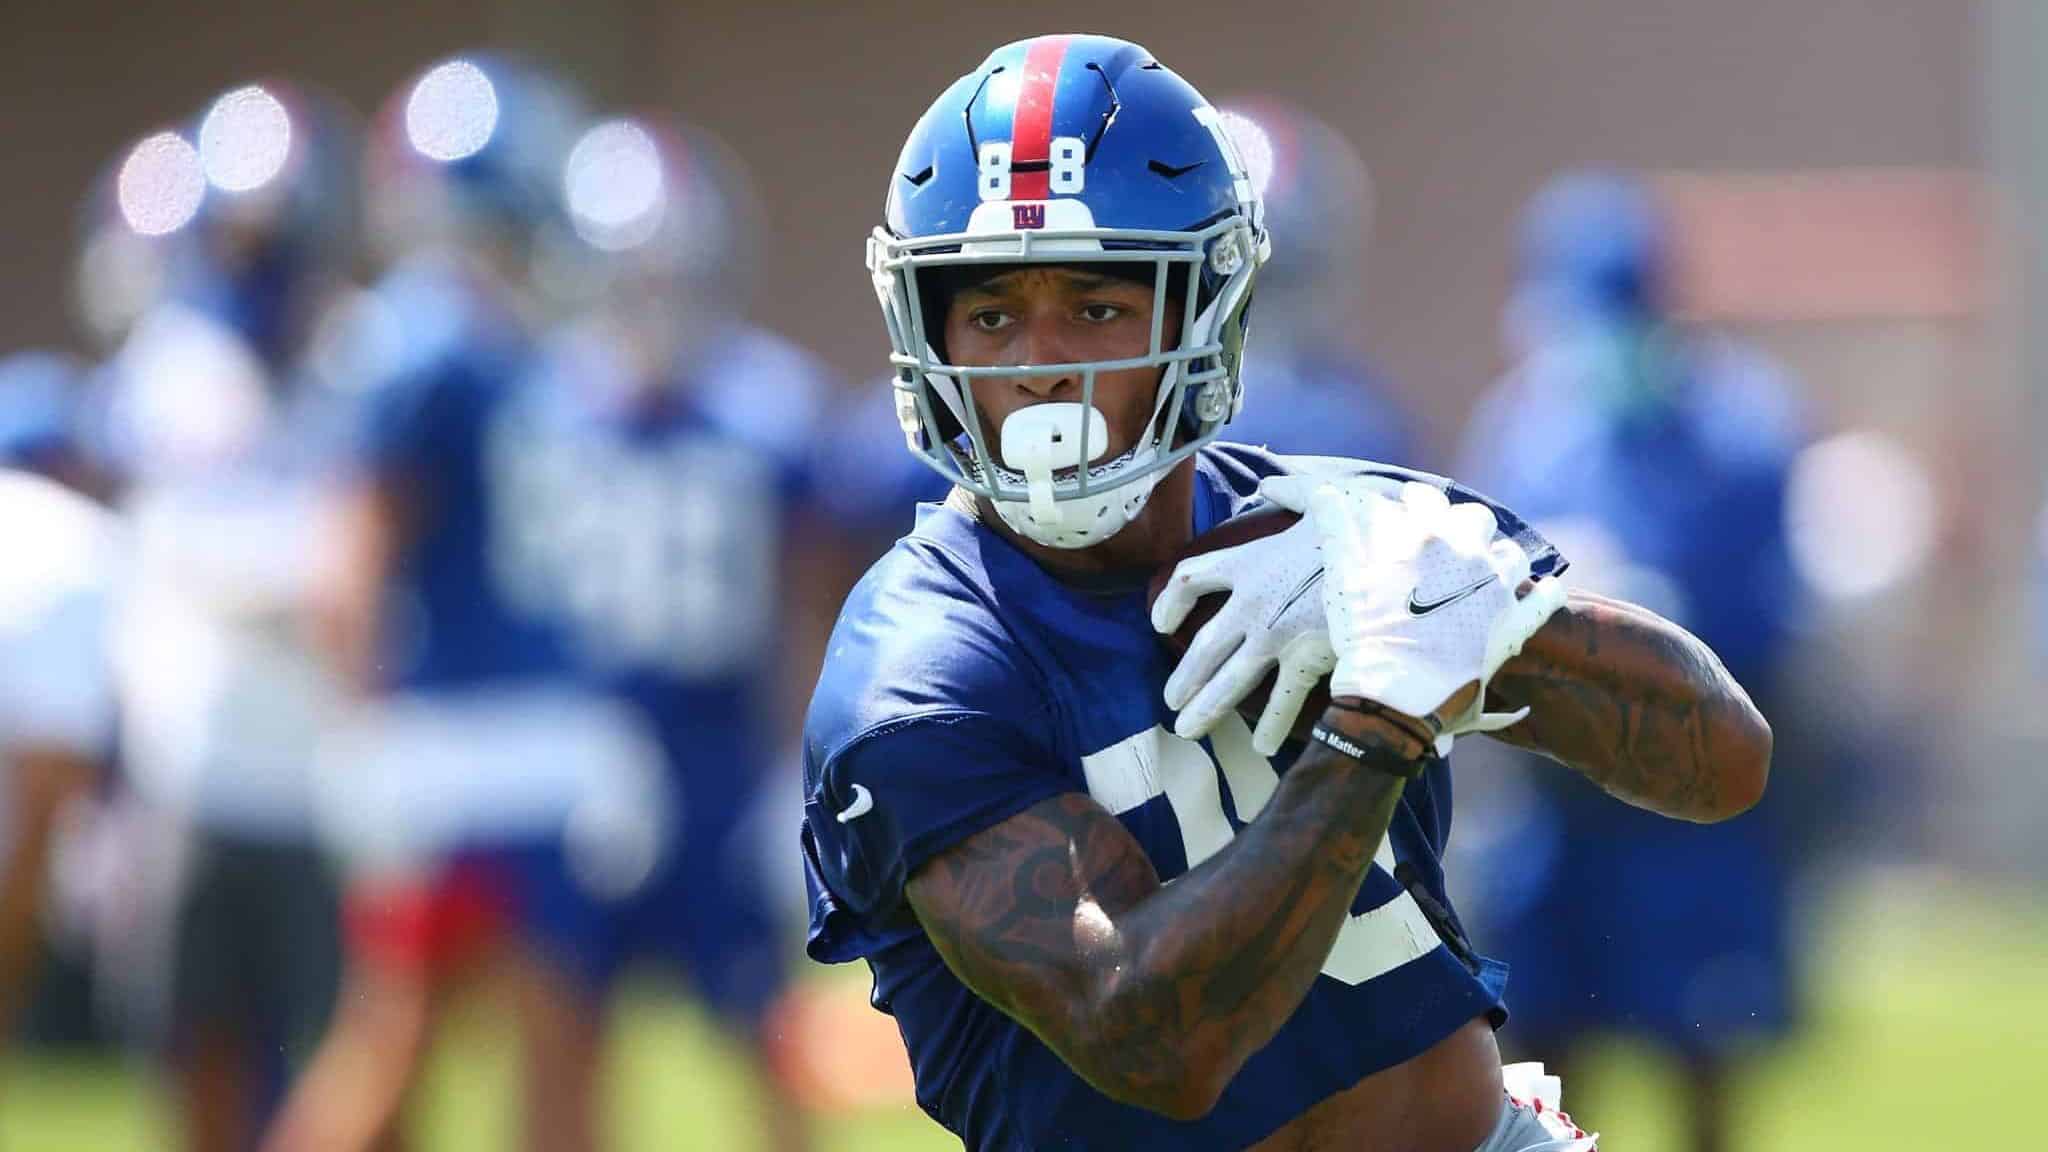 EAST RUTHERFORD, NEW JERSEY - AUGUST 23: Evan Engram #88 of the New York Giants runs drills at NY Giants Quest Diagnostics Training Center on August 23, 2020 in East Rutherford, New Jersey.